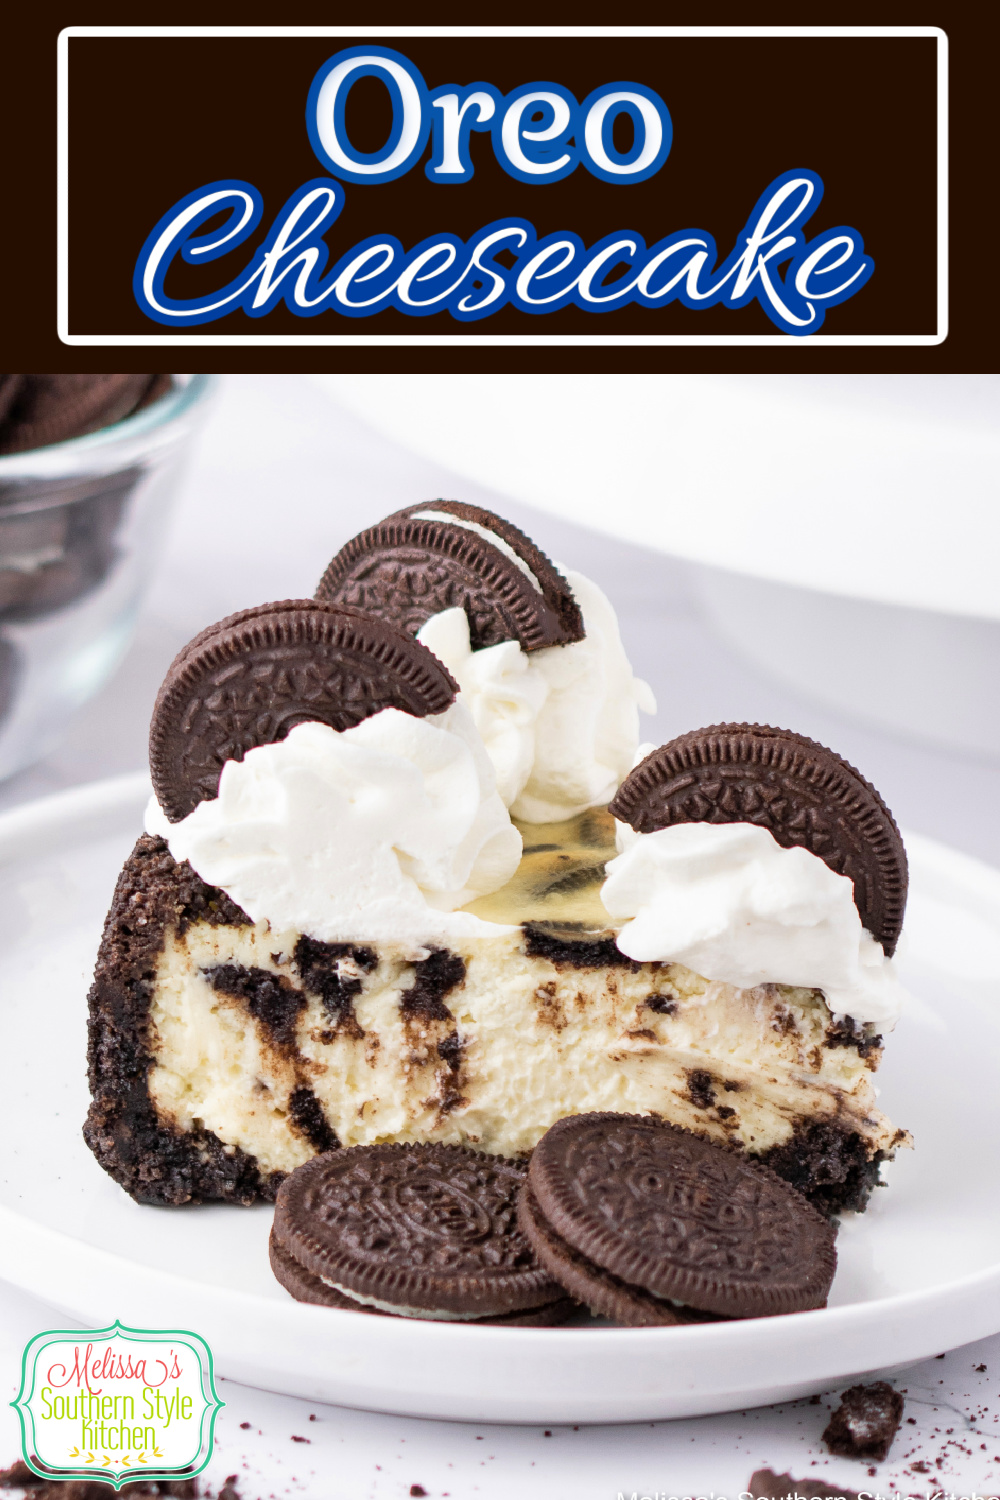 You'll love serving this easy Oreo Cheesecake recipe for dessert! #oreo #cheesecake #cheesecakerecipes #oreocheesecake #chocolate #oreorecipes #desserts